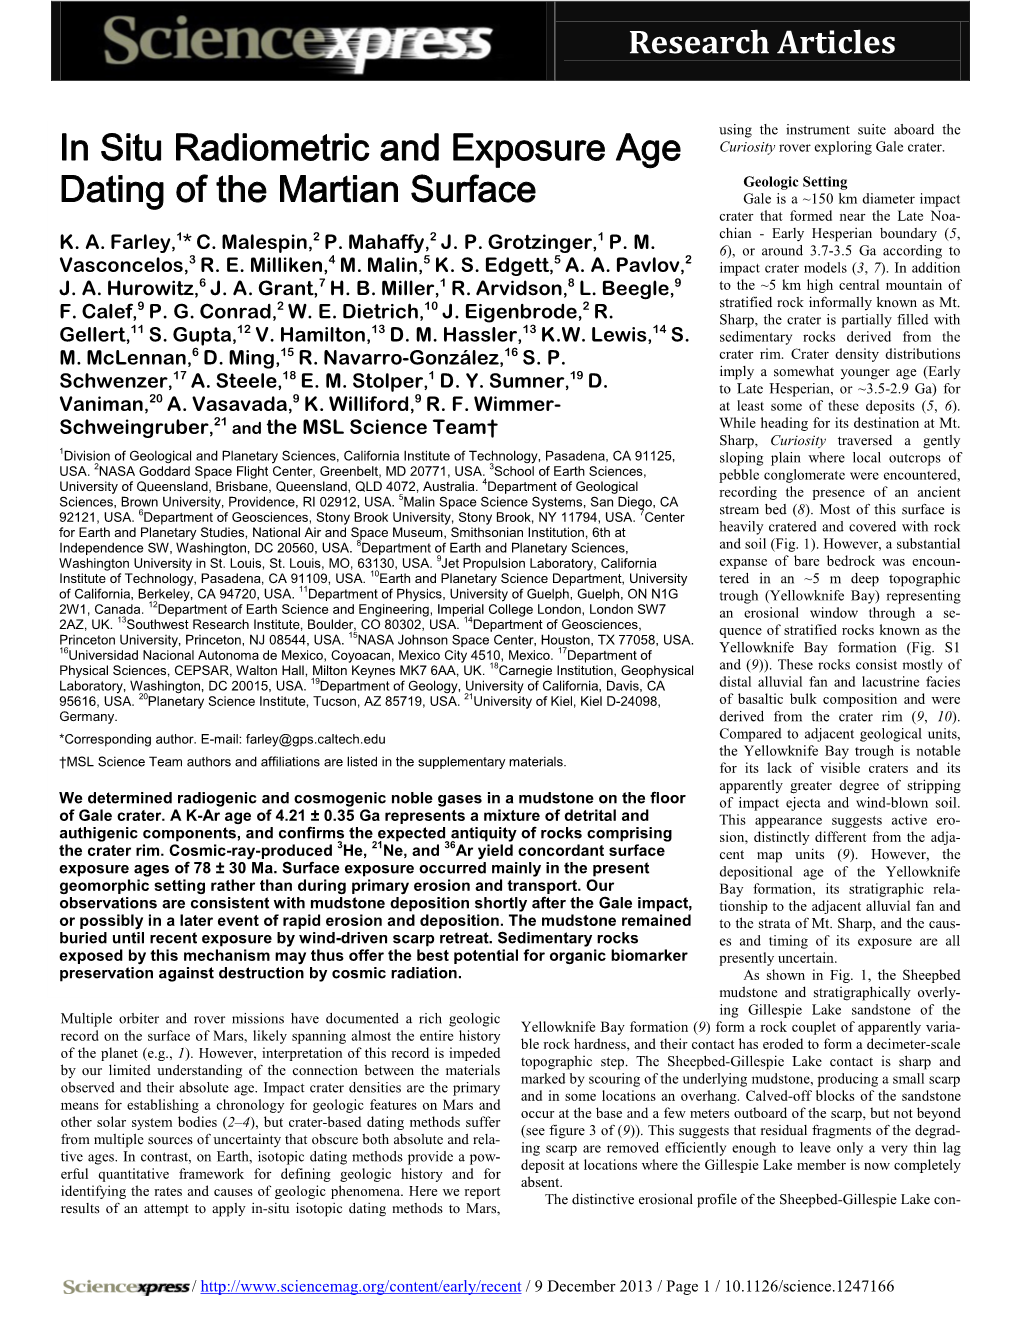 In Situ Radiometric and Exposure Age Dating of the Martian Surface